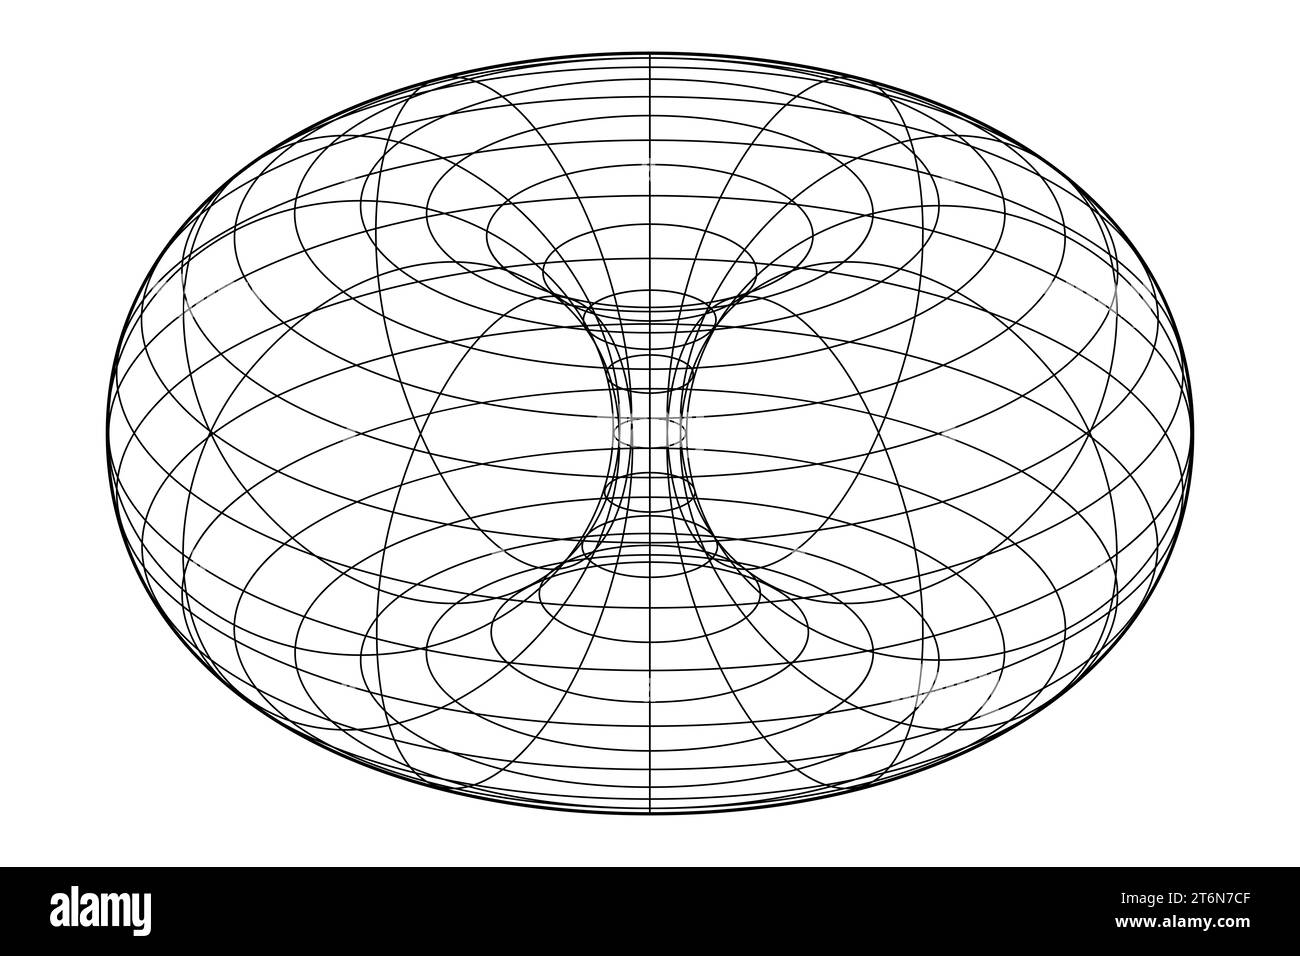 Wire-frame of a ring torus, also donut or doughnut. In geometry, a surface of revolution generated by revolving a circle in 3D space. Stock Photo